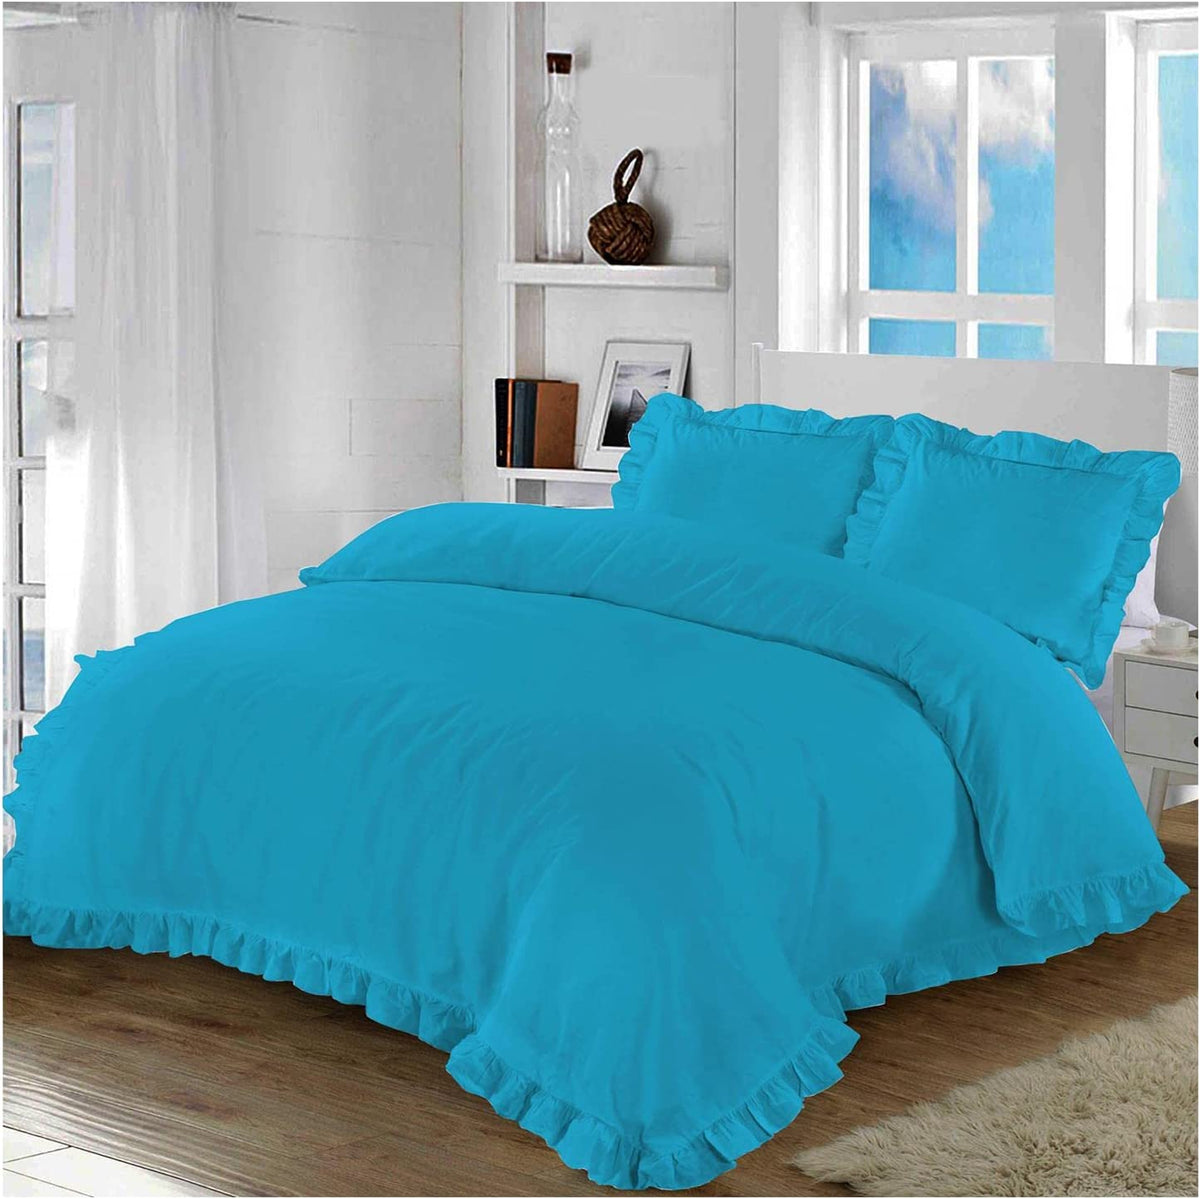 Ruffled Frilled Duvet Cover Set With Pillowcases Polycotton Duvet Quilt Covers Soft Comfy Bedding Set Teal Super King